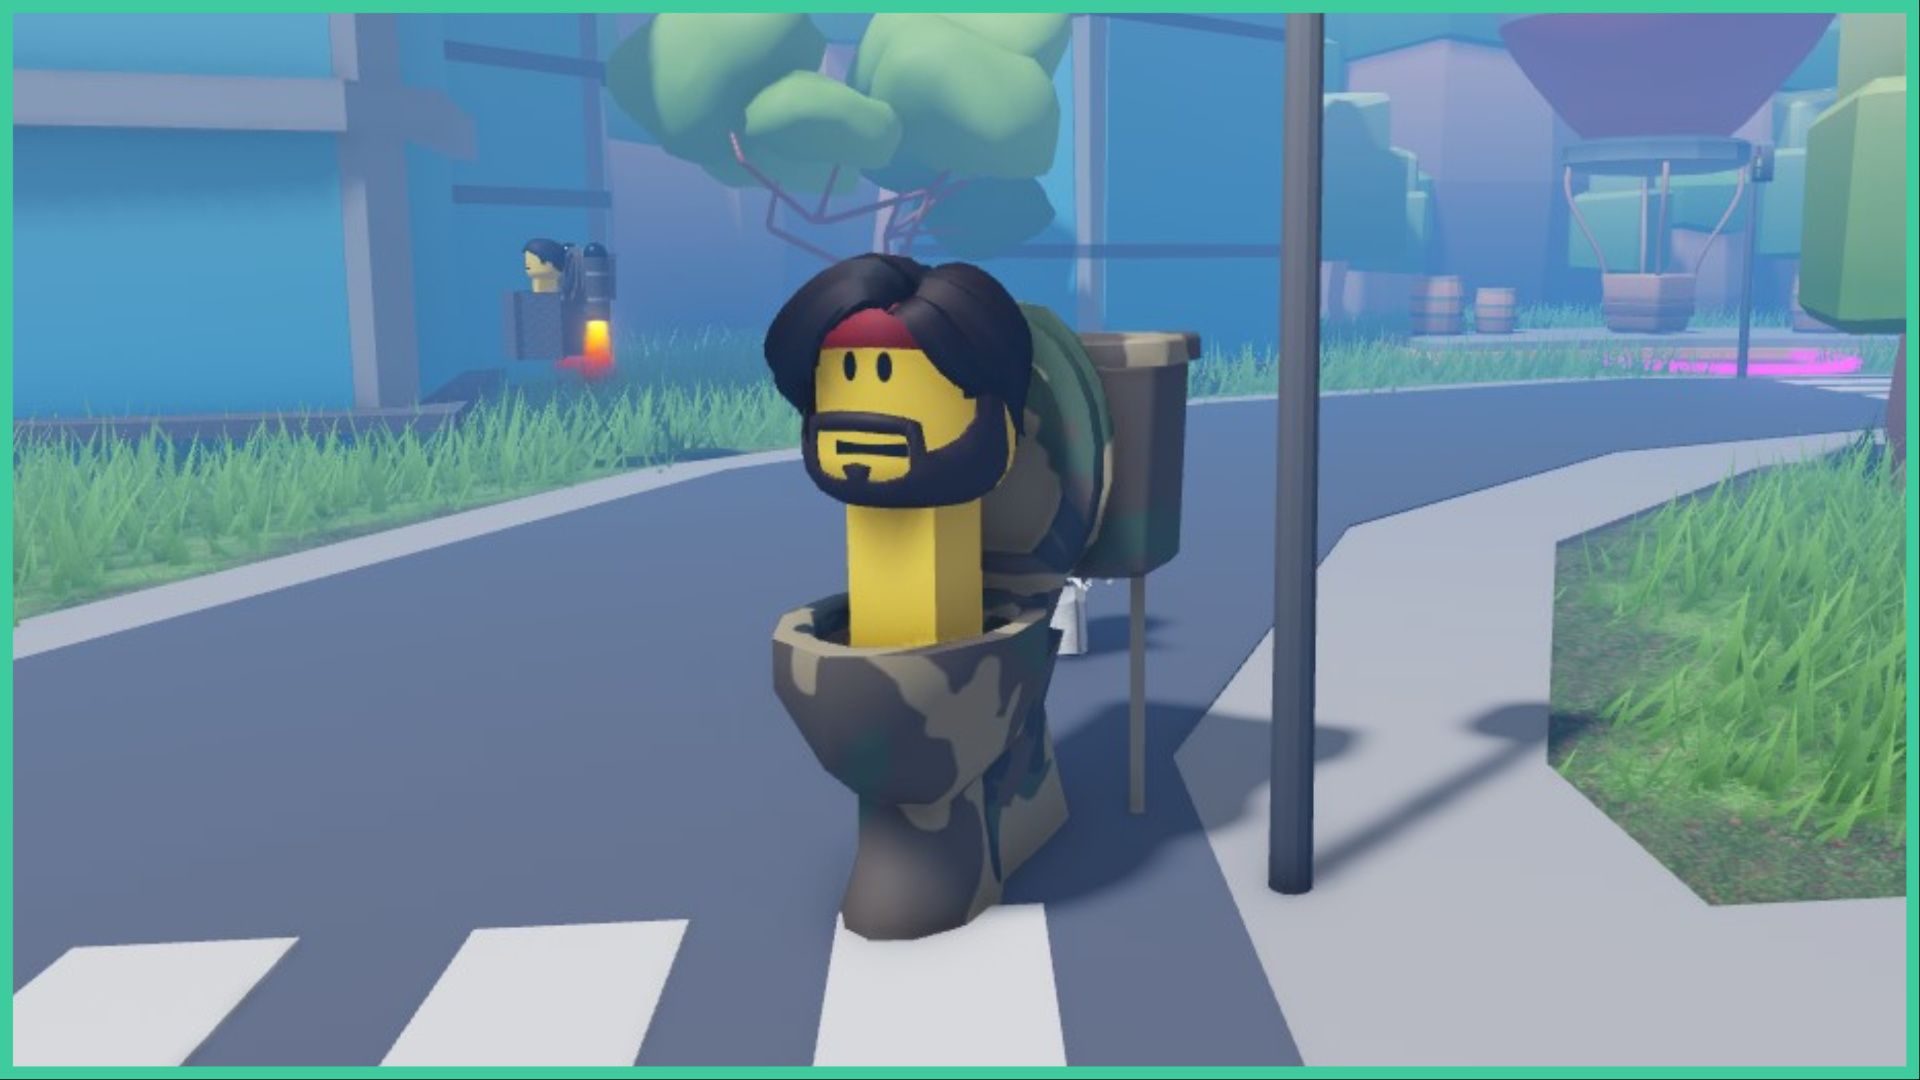 feature image for our toilet rng codes guide, the image is a screenshot of a bearded head with a long neck coming out of a toilet bowl that has a camo print on it in the middle of a road, there is also a head coming out of a toilet in the background that has a jet pack on the back